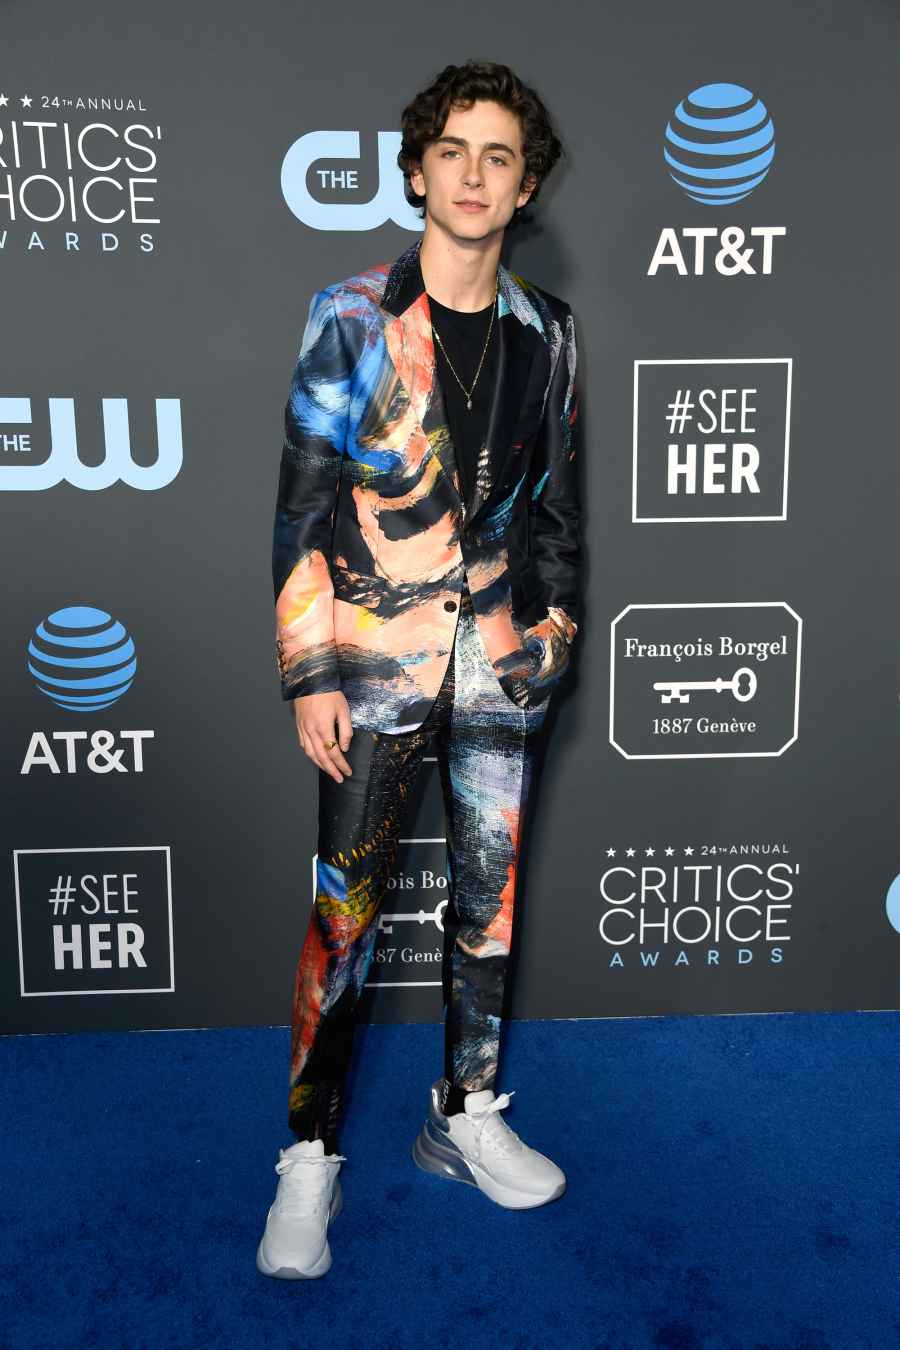 Critic's Choice Awards 2019: Hot Guys in Suits